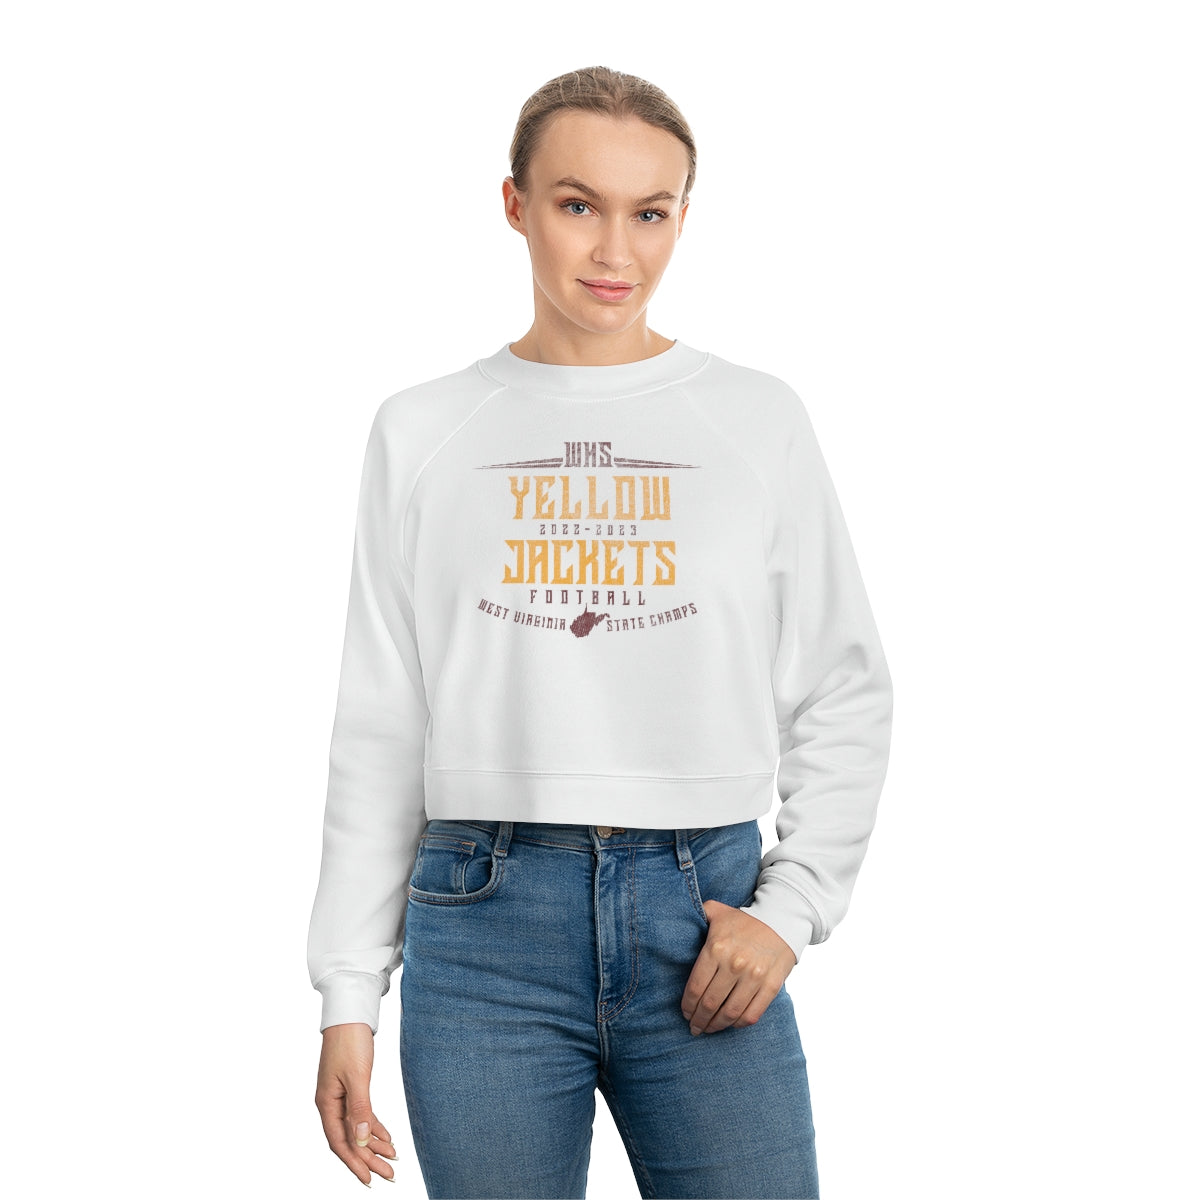 WHS YELLOW JACKETS STATE CHAMPS-Women's Cropped Fleece Pullover